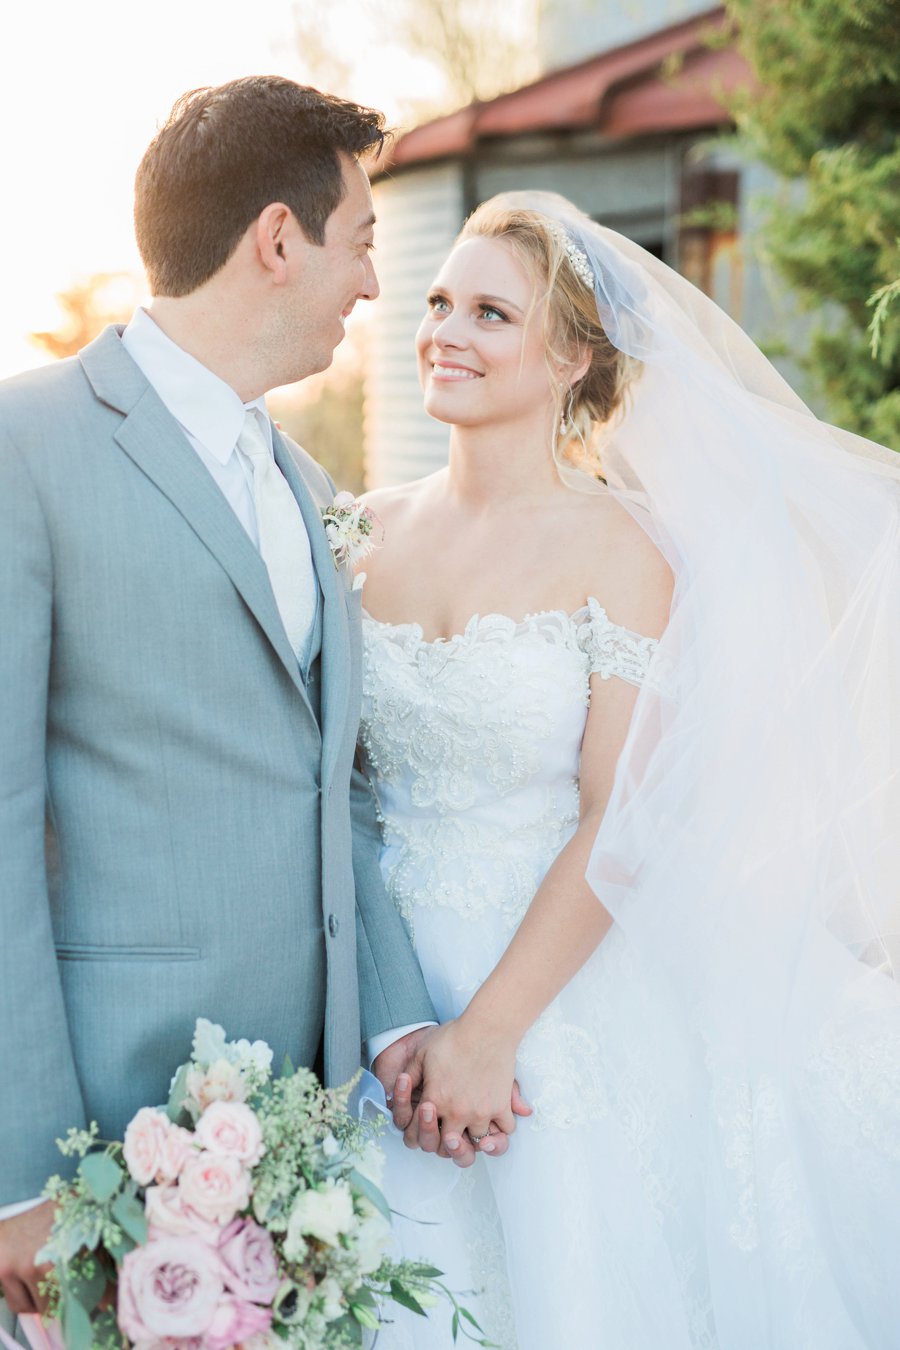 An Eclectic, Rustic Pink & Blue Texas Wedding Day via TheELD.com